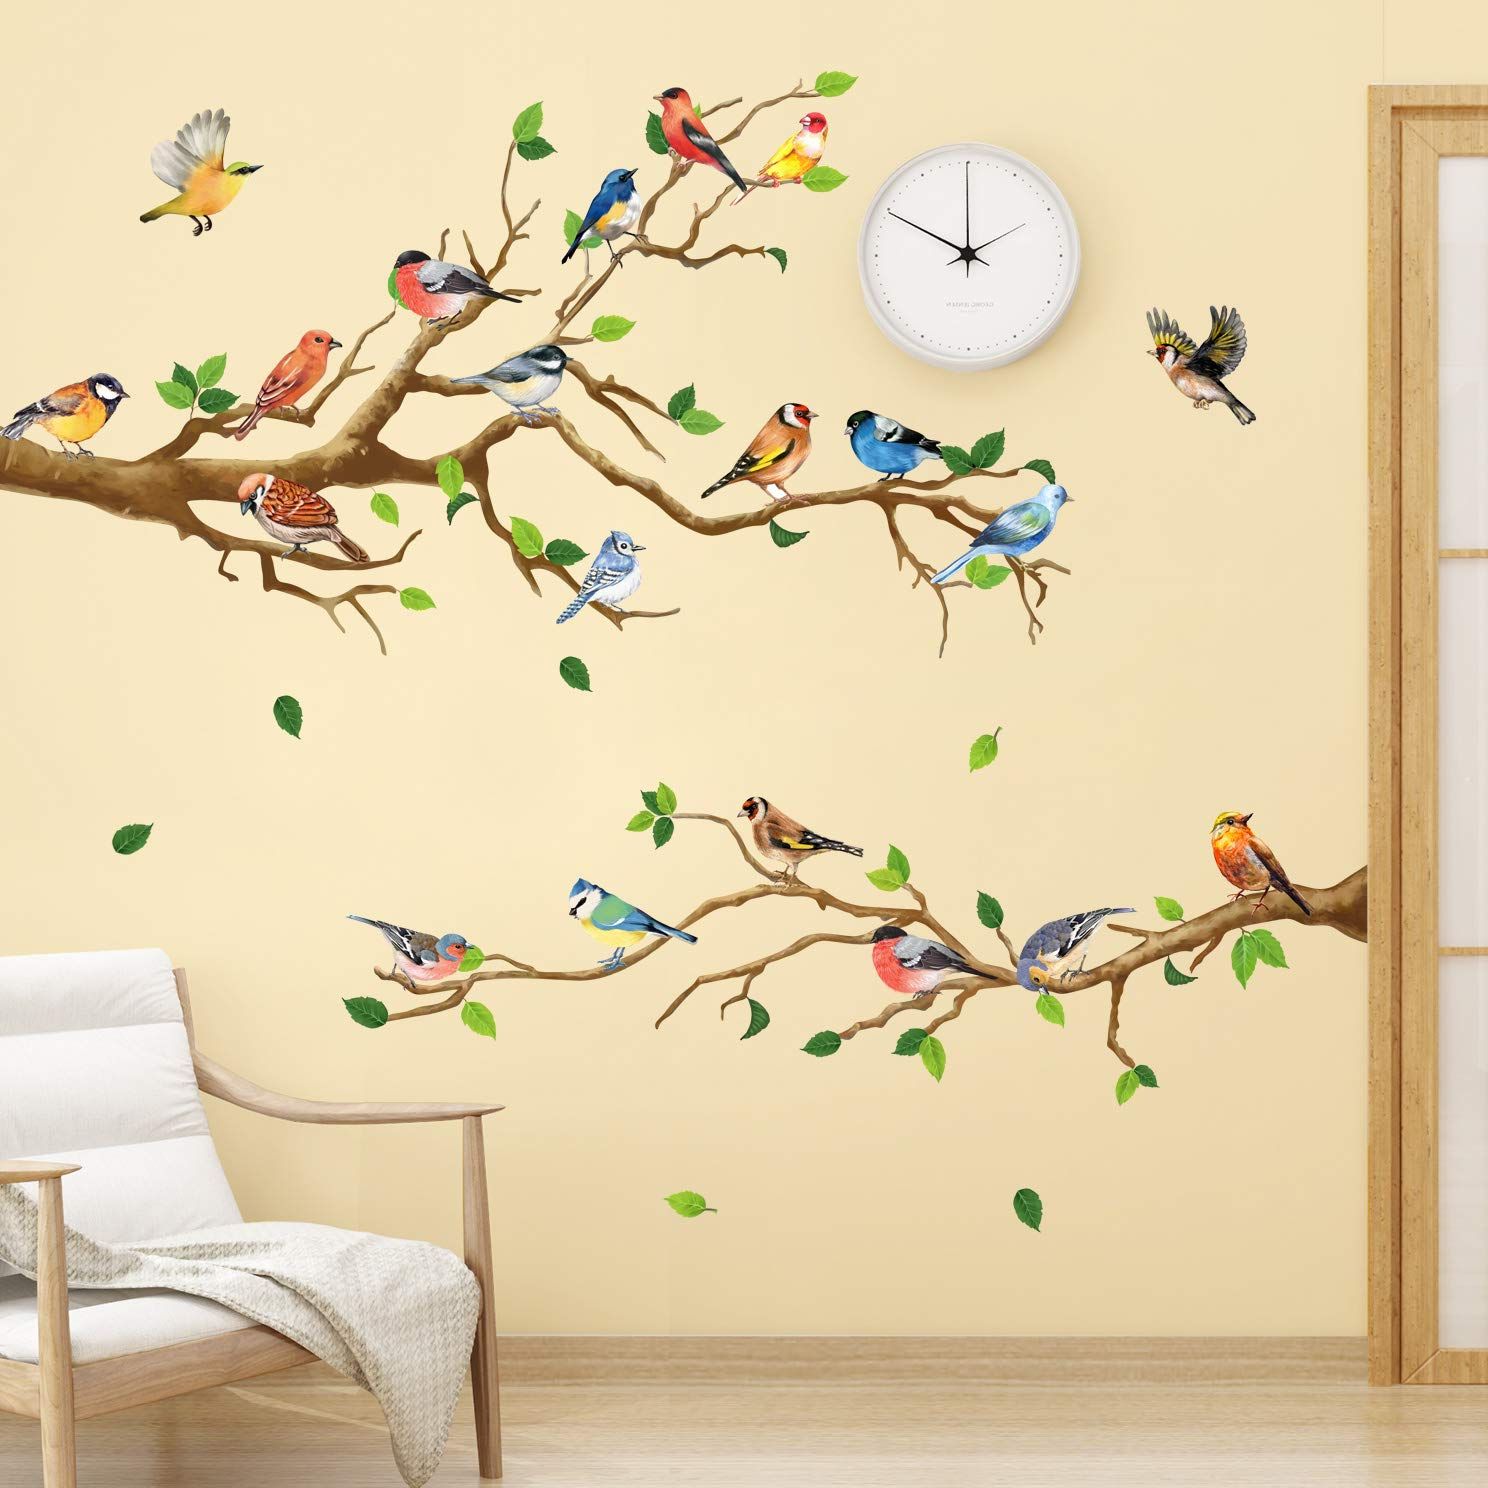 Most Current Amazon: Rw Zsz1069 Birds On Tree Wall Decals Tree Branch Wall Stickers  Colorful Birds Green Tree Decals Diy Removable Colorful Flying Bird Tree  Wall Art Decor For Kids Baby Bedroom Living Room Nursery Regarding Bird On Tree Branch Wall Art (View 2 of 15)